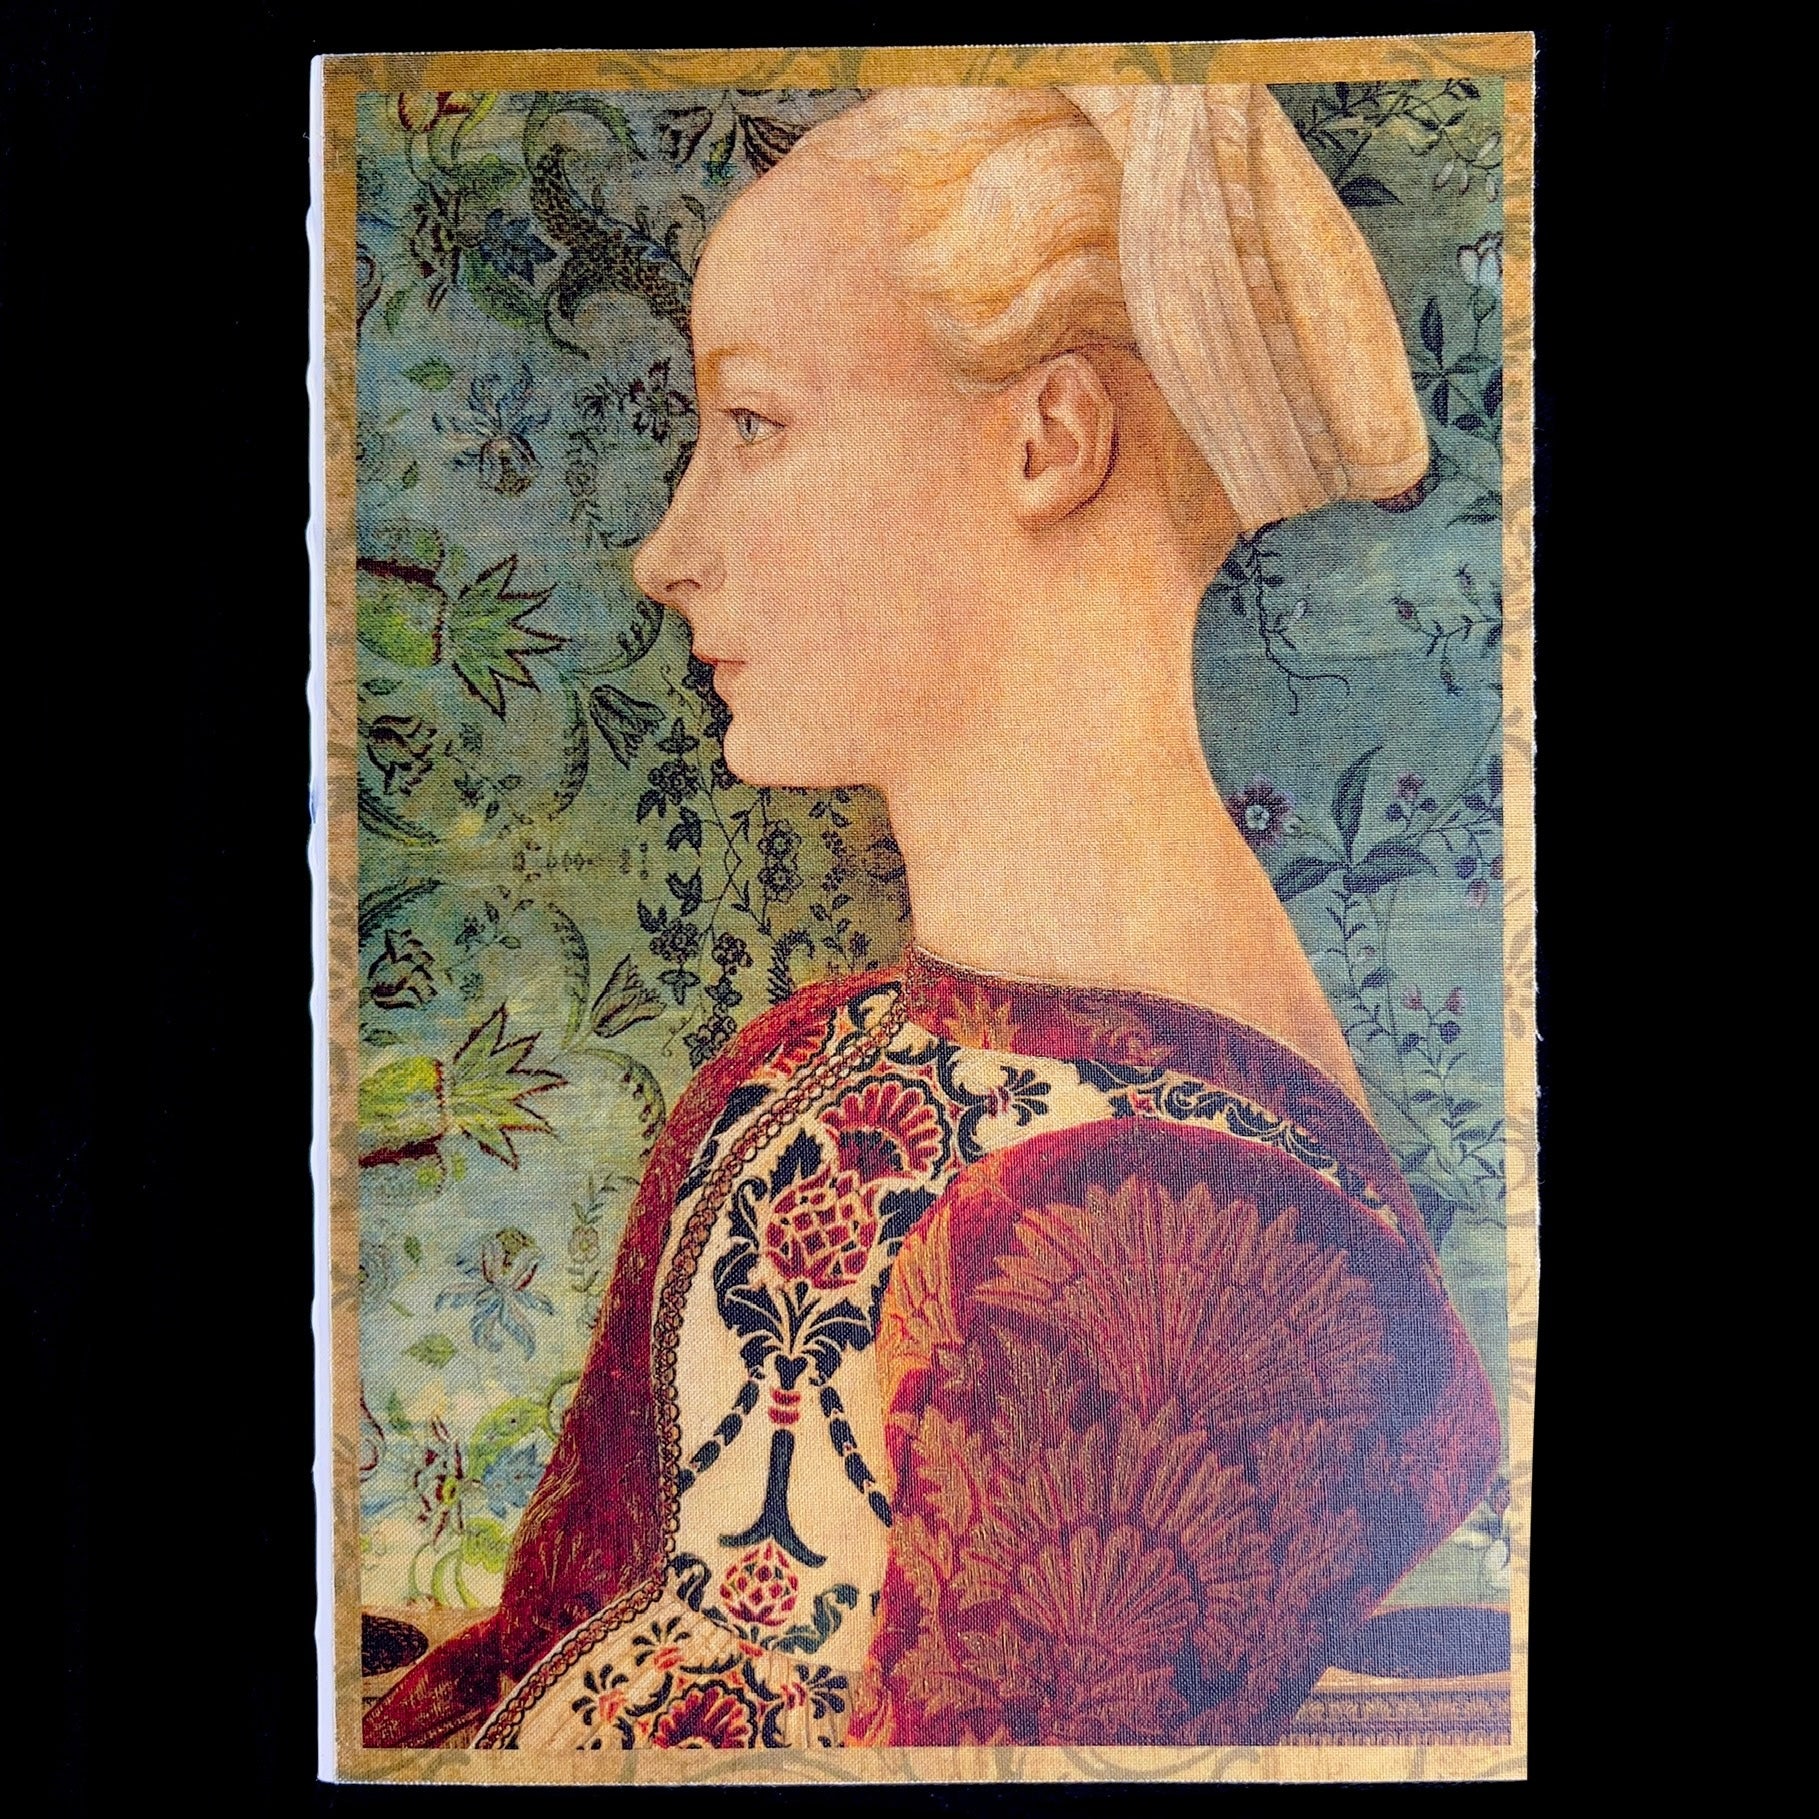 Front cover of Journal with Female Portrait